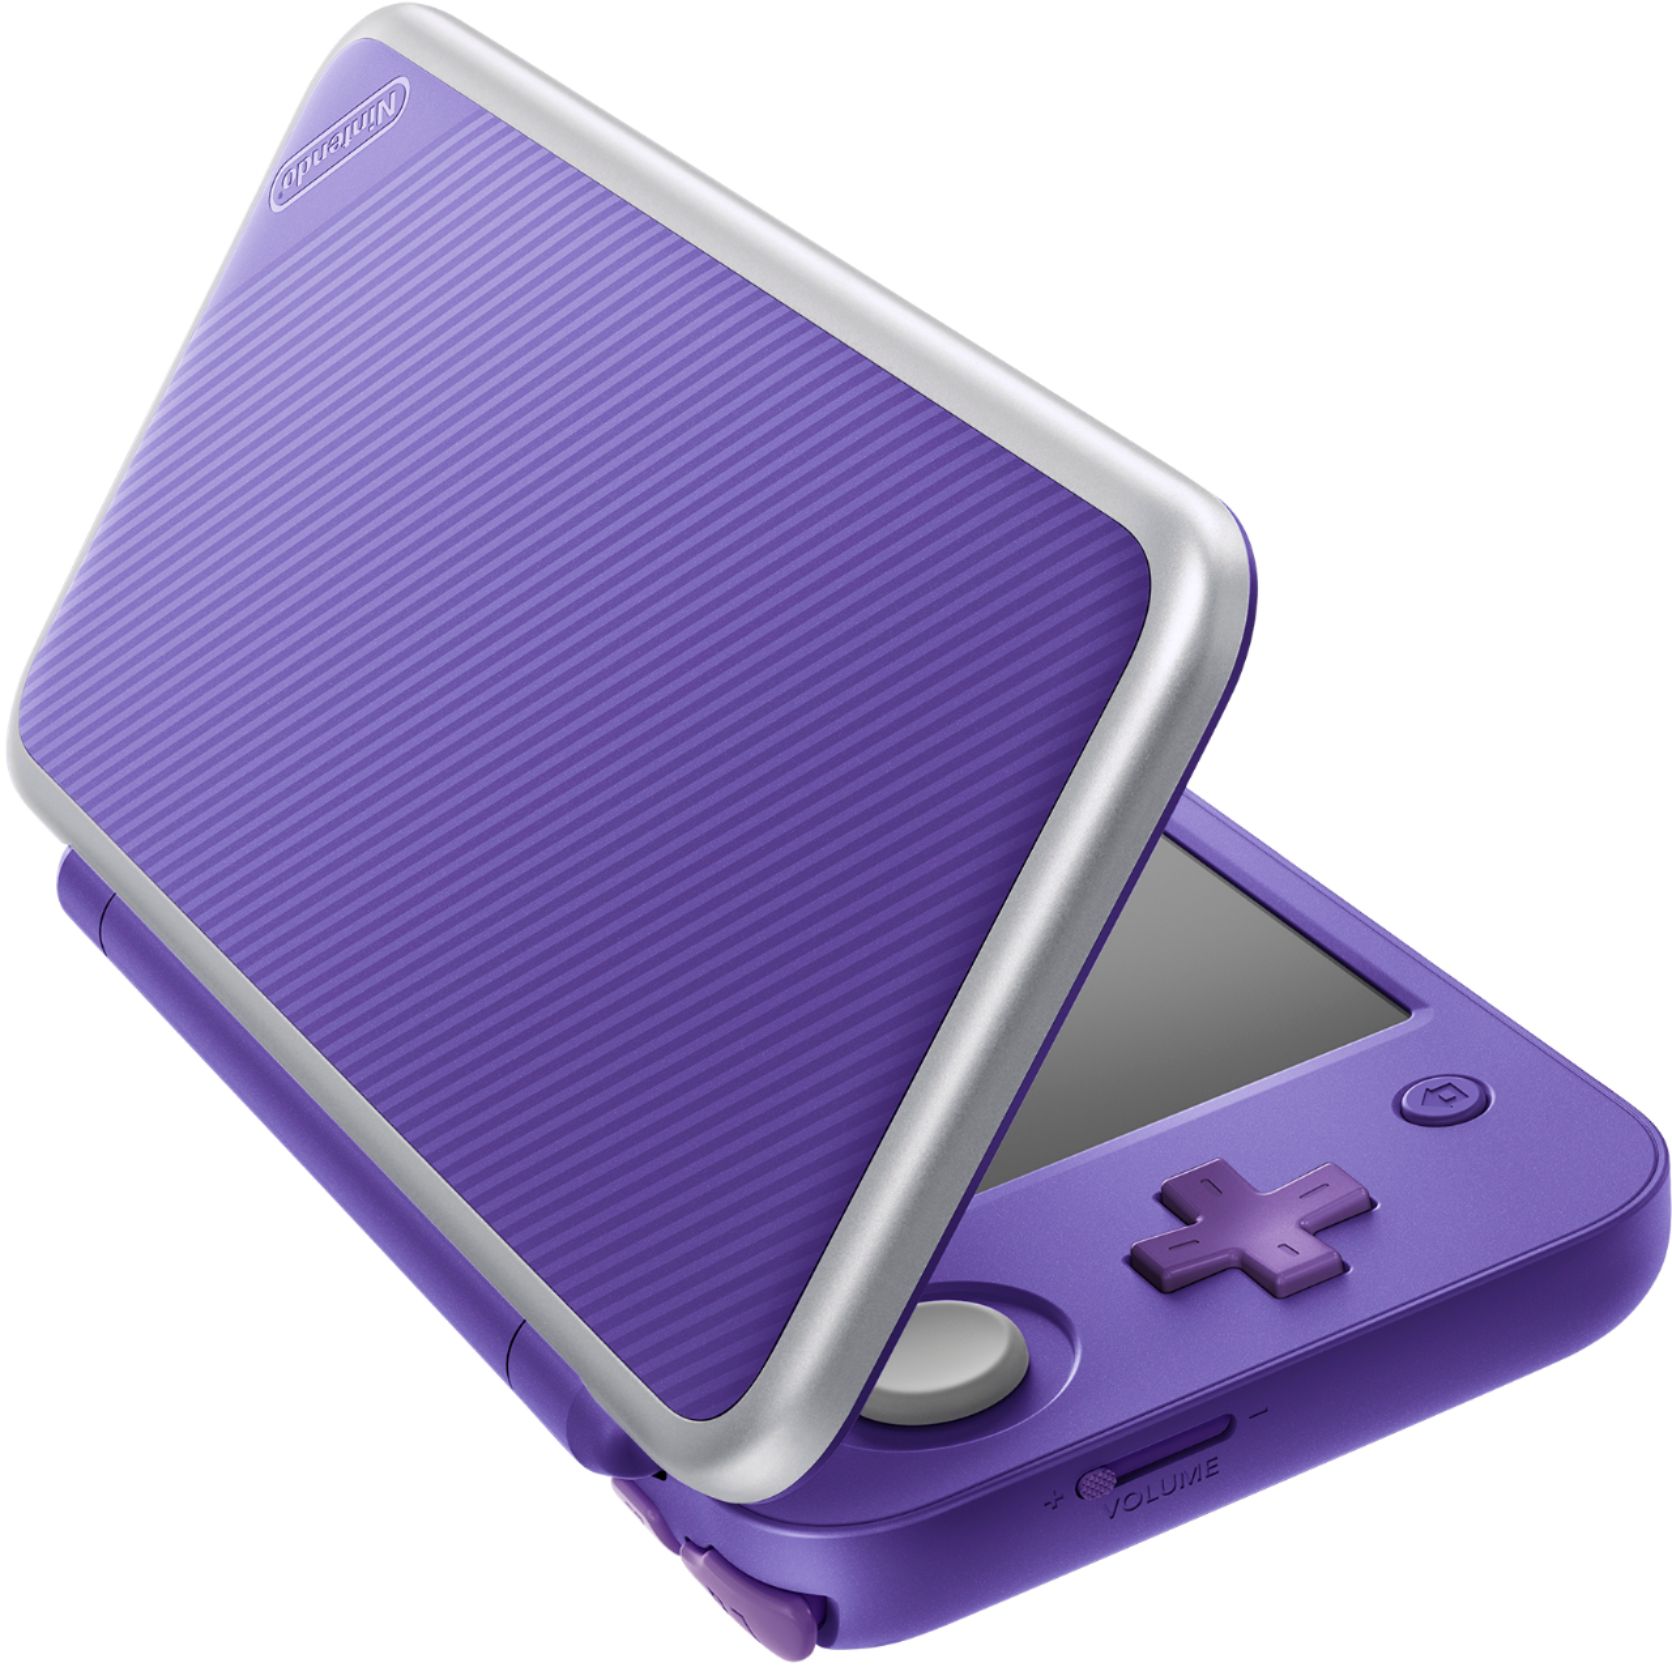 where can i buy nintendo 2ds xl